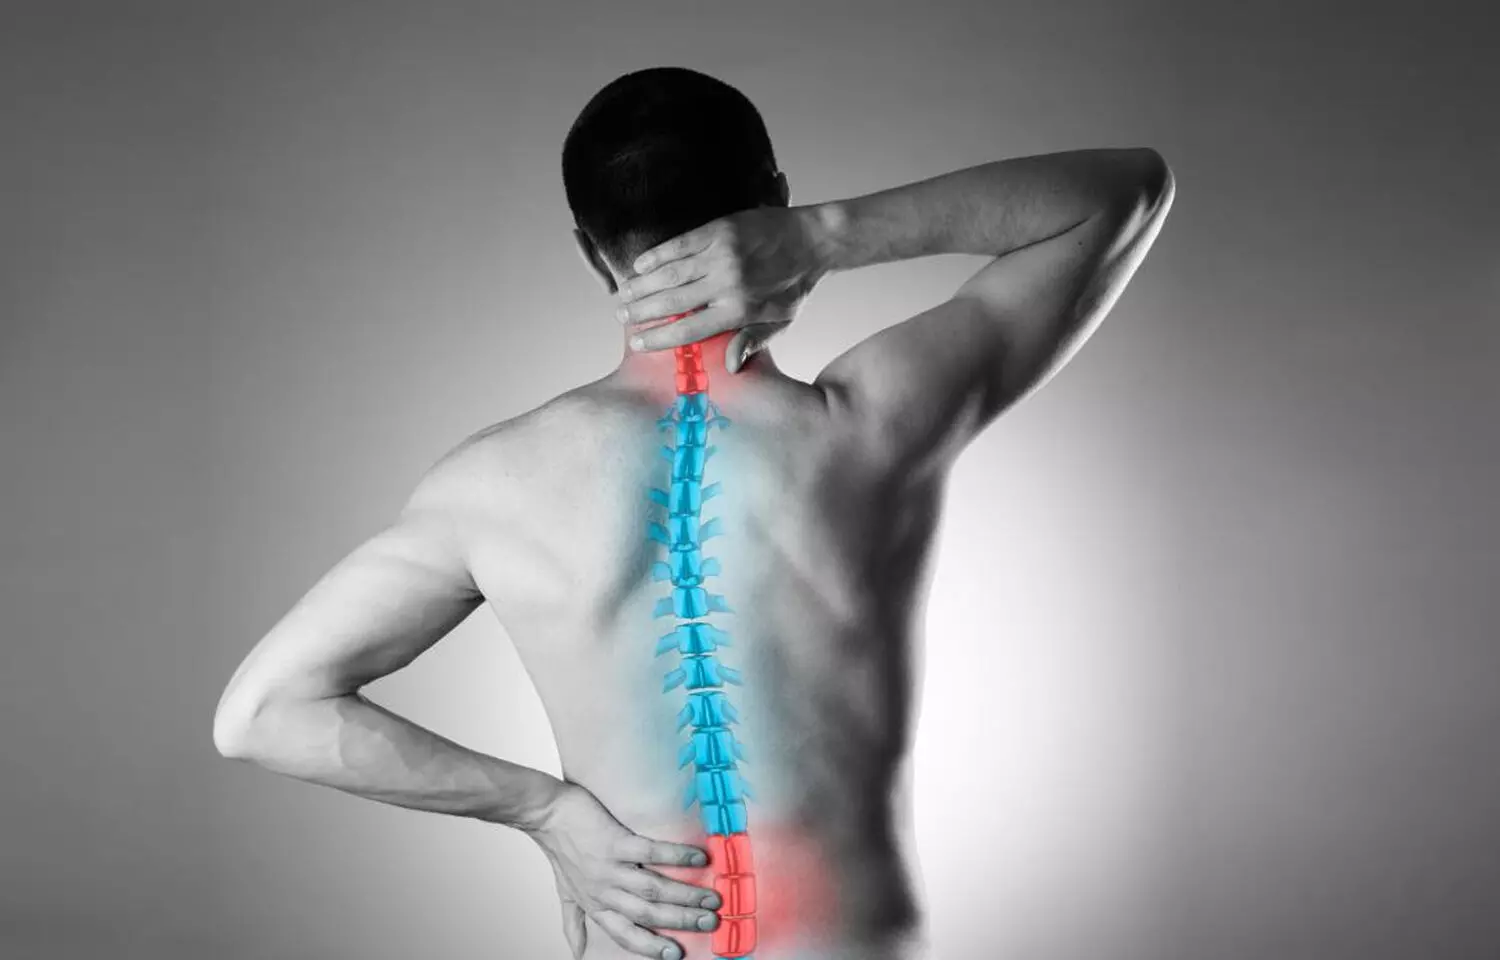 Epidural interventions in management of chronic spinal pain: ASIPP Guideline